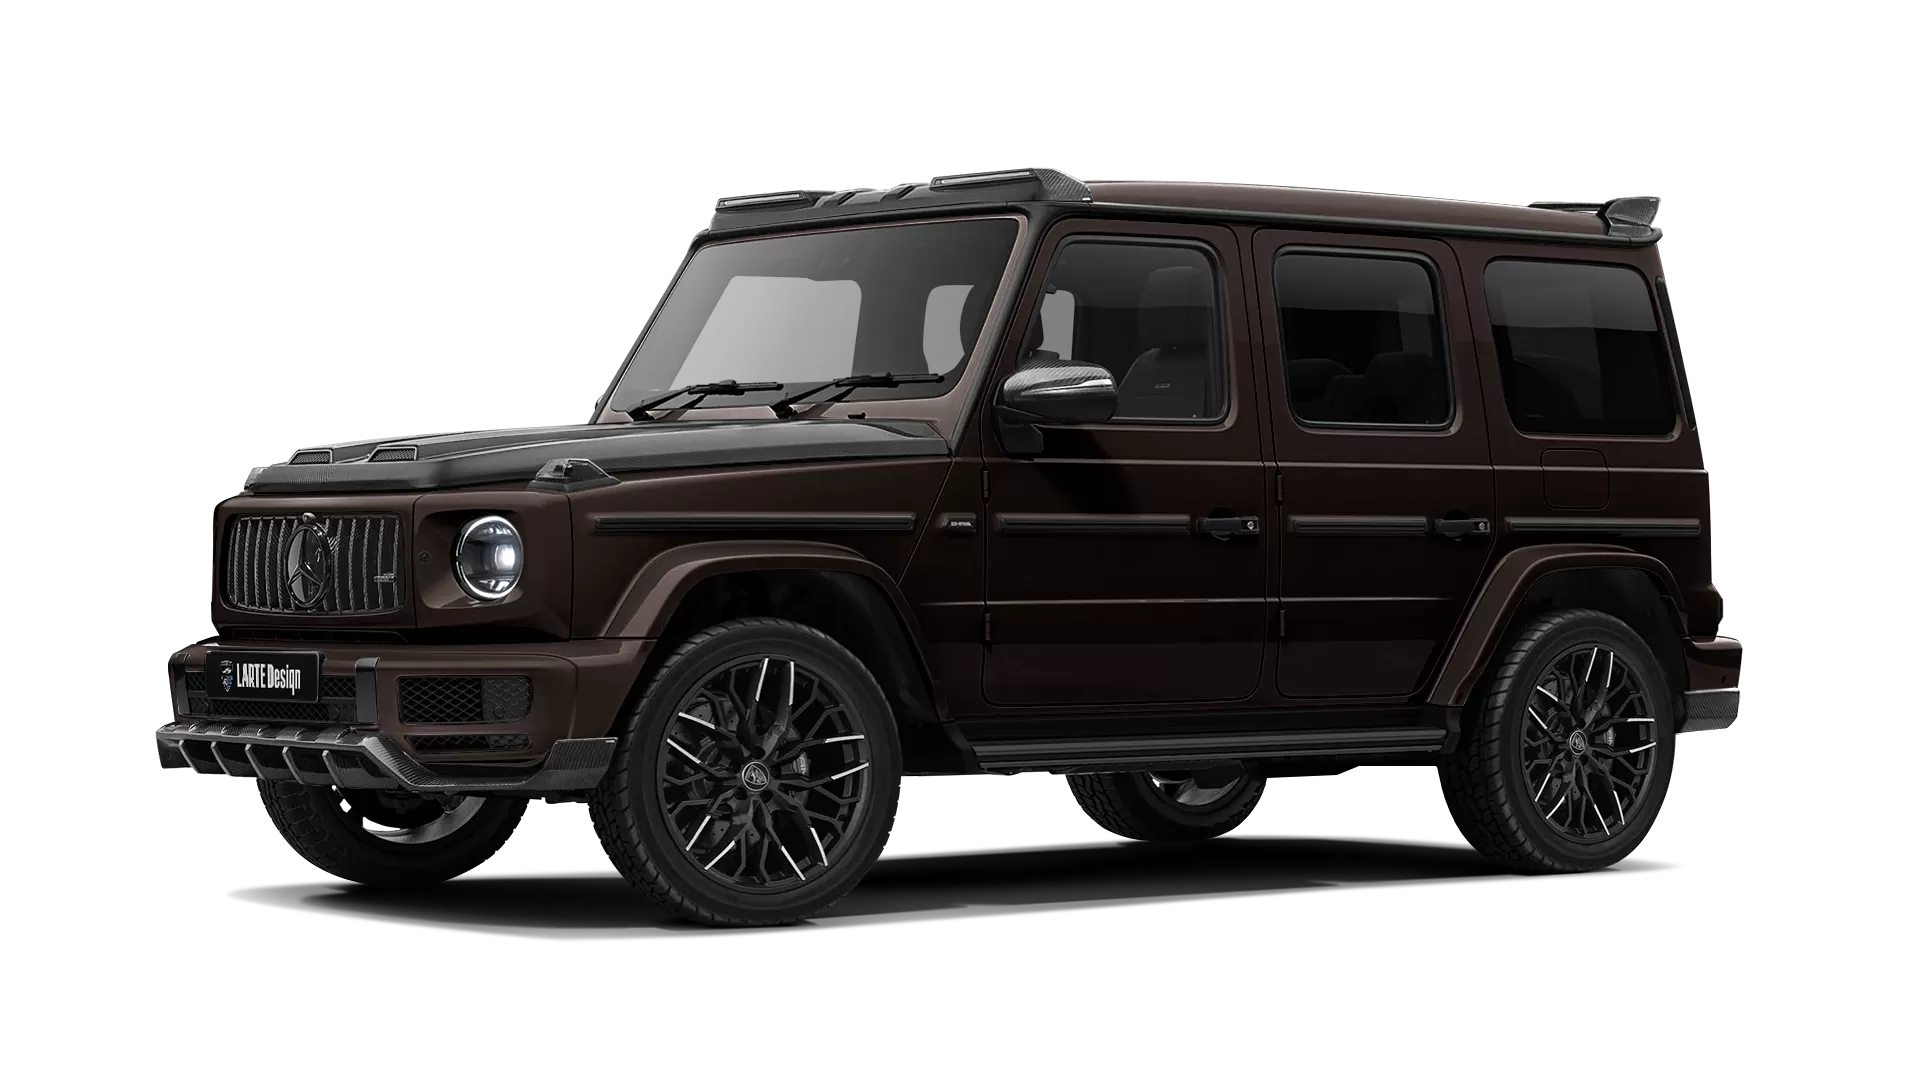 Mercedes G class W463 with carbon body kit: front view shown in Citrine Brown